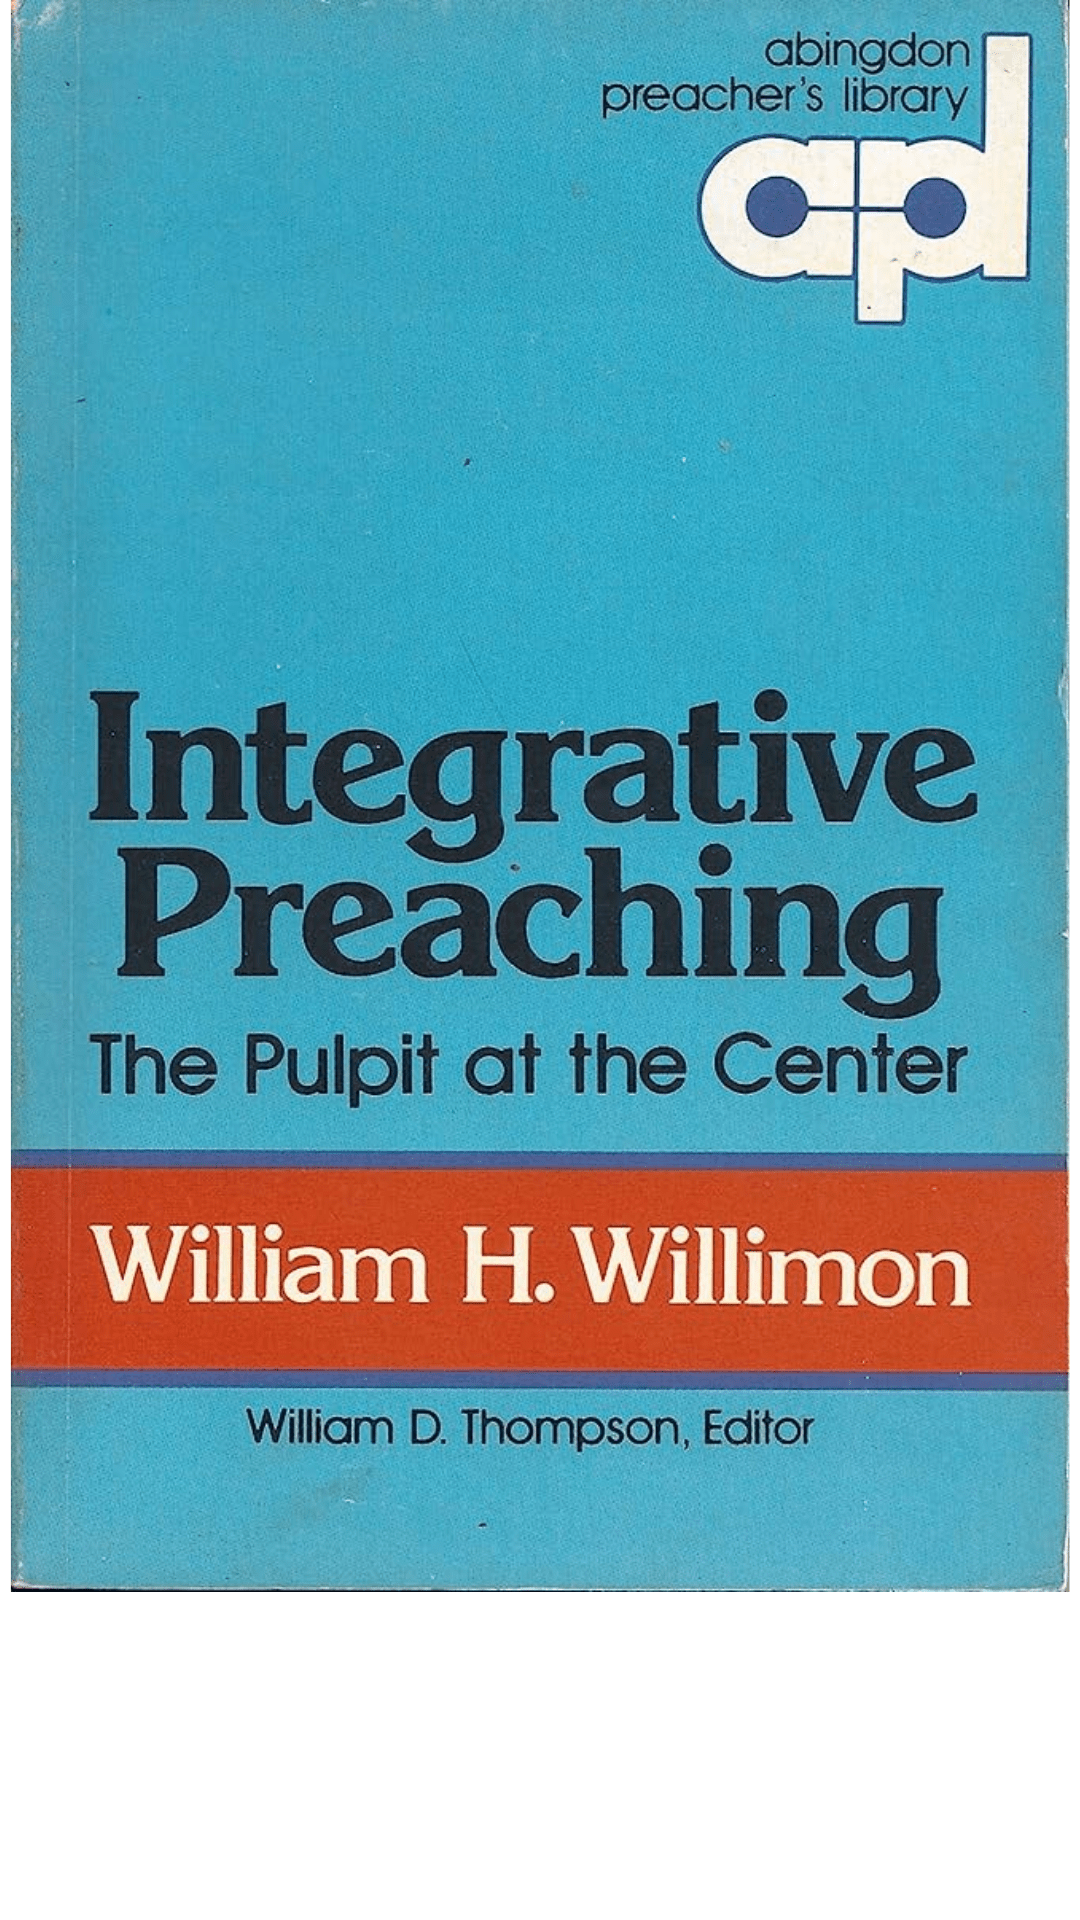 Integrative Preaching by William H. Willimon